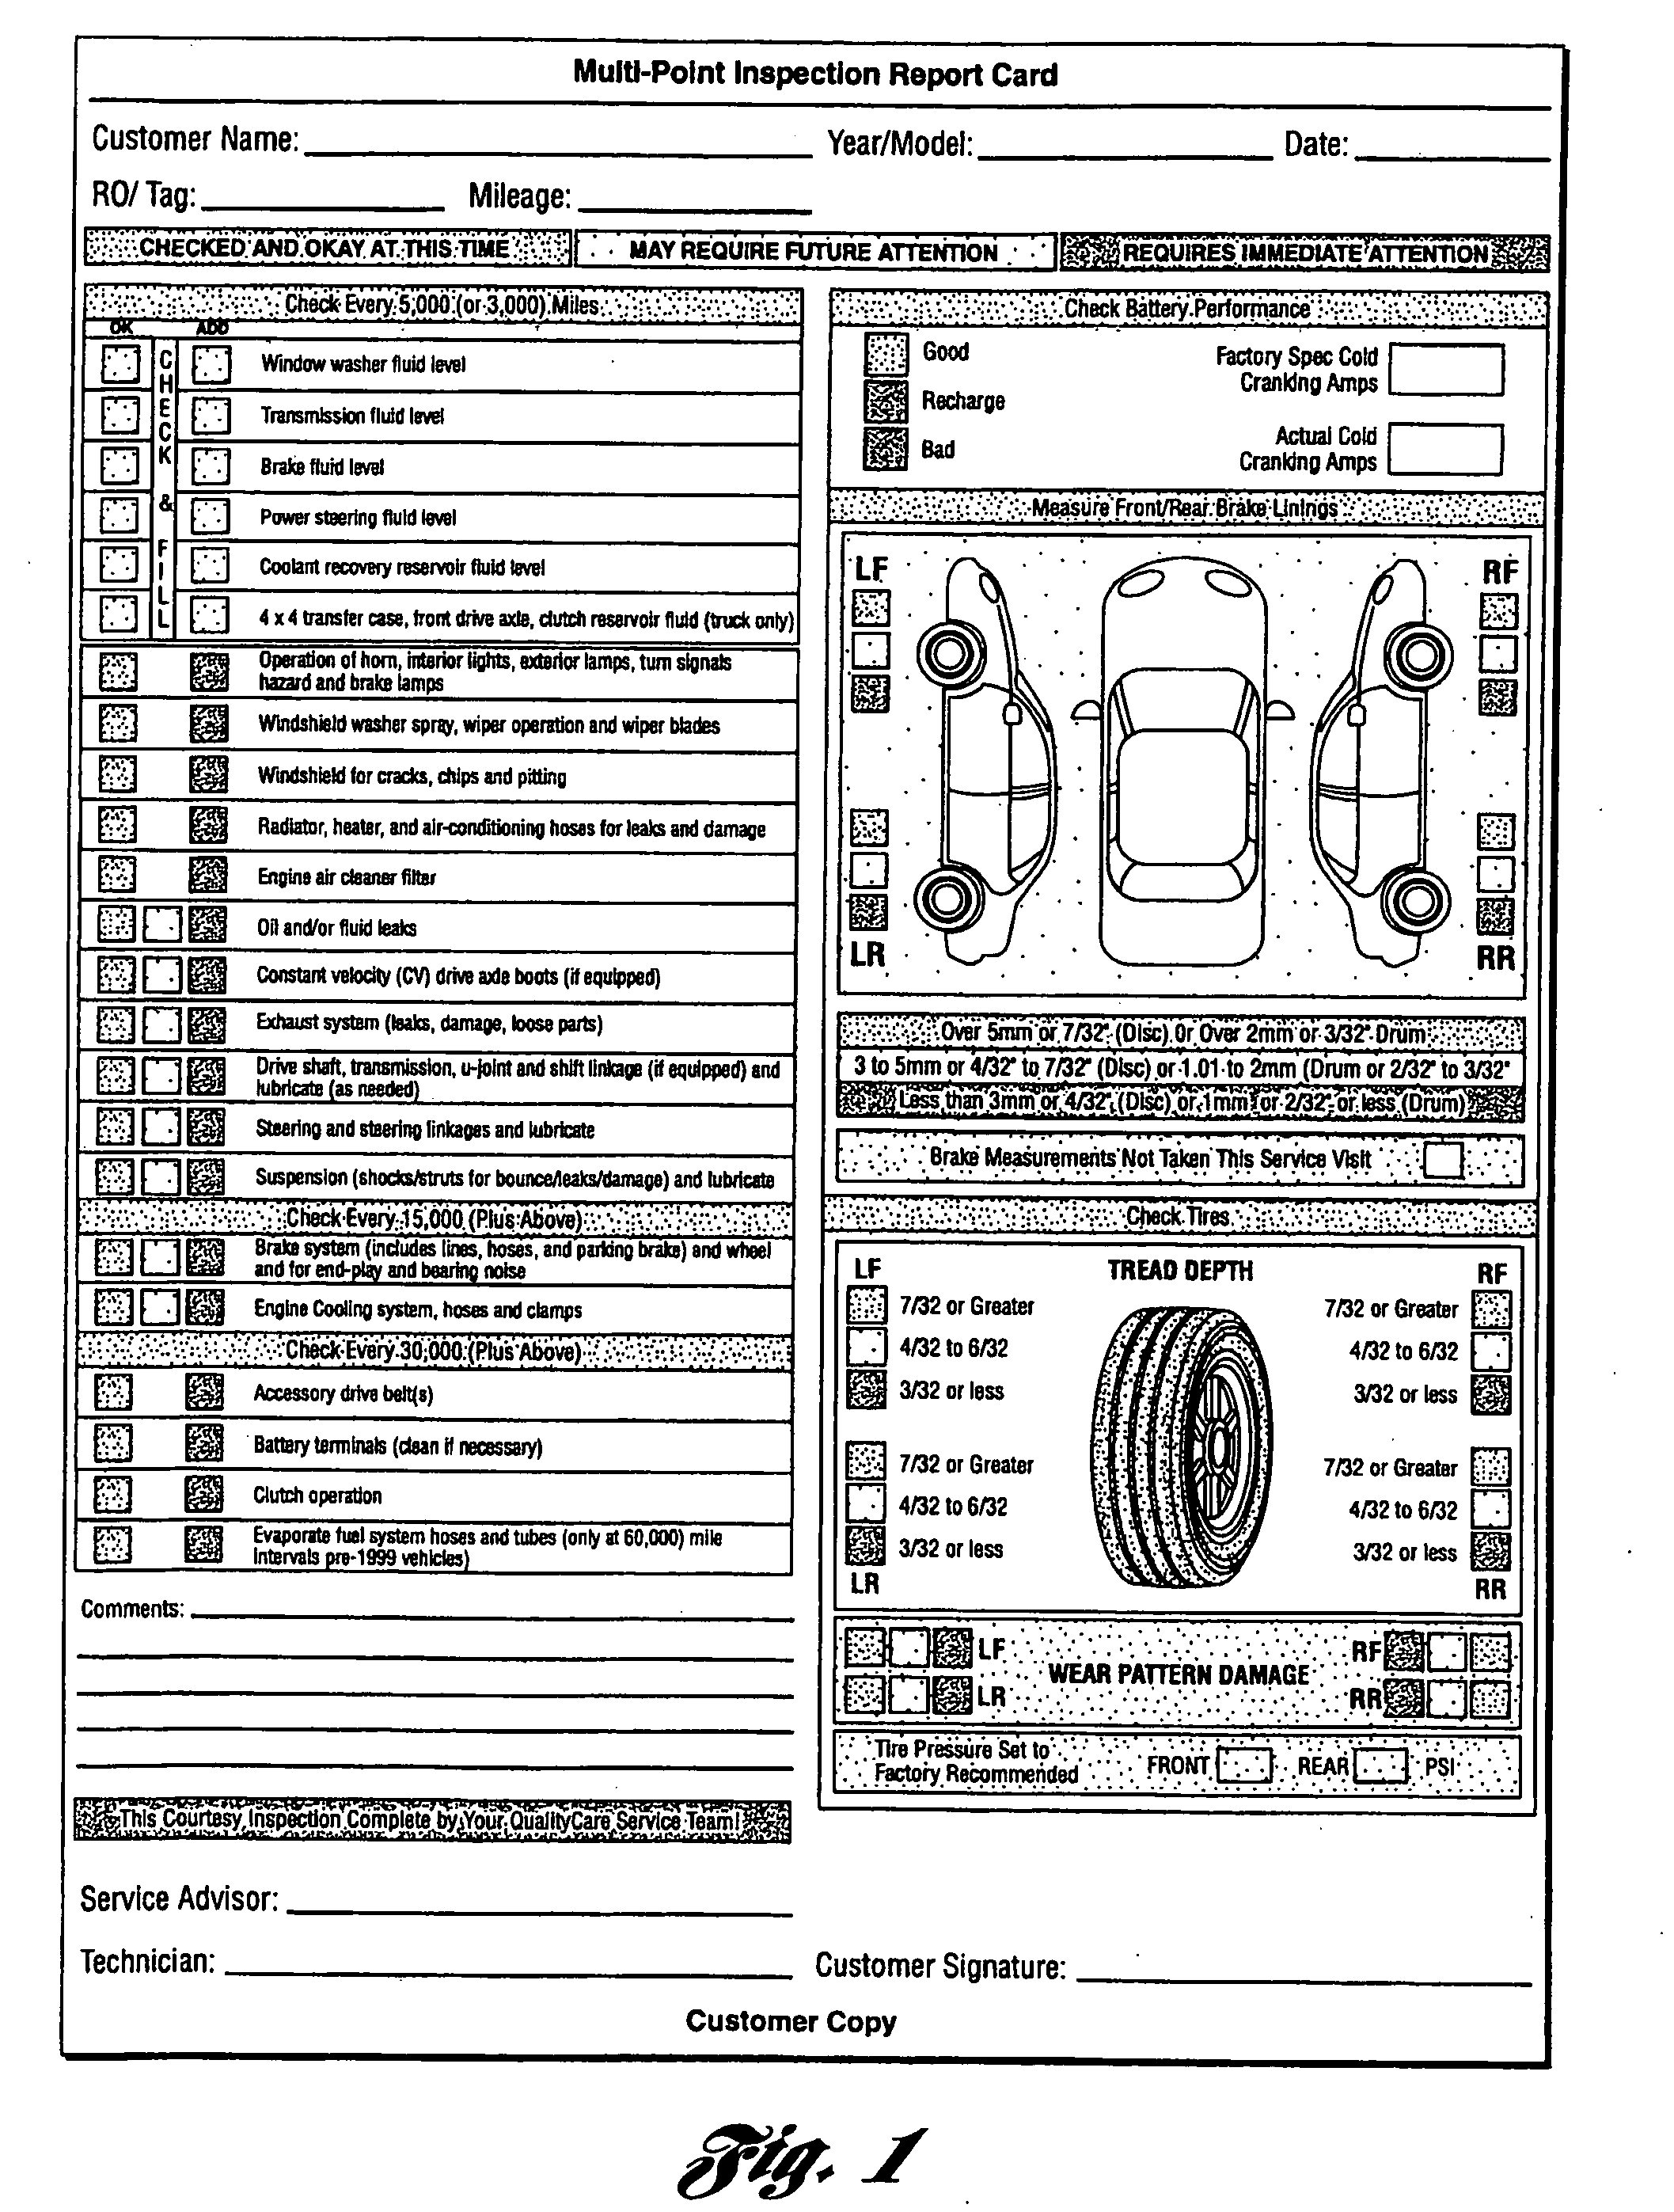 Multi Point Inspection Report Card As Recommendedford Pertaining To Vehicle Inspection Report Template